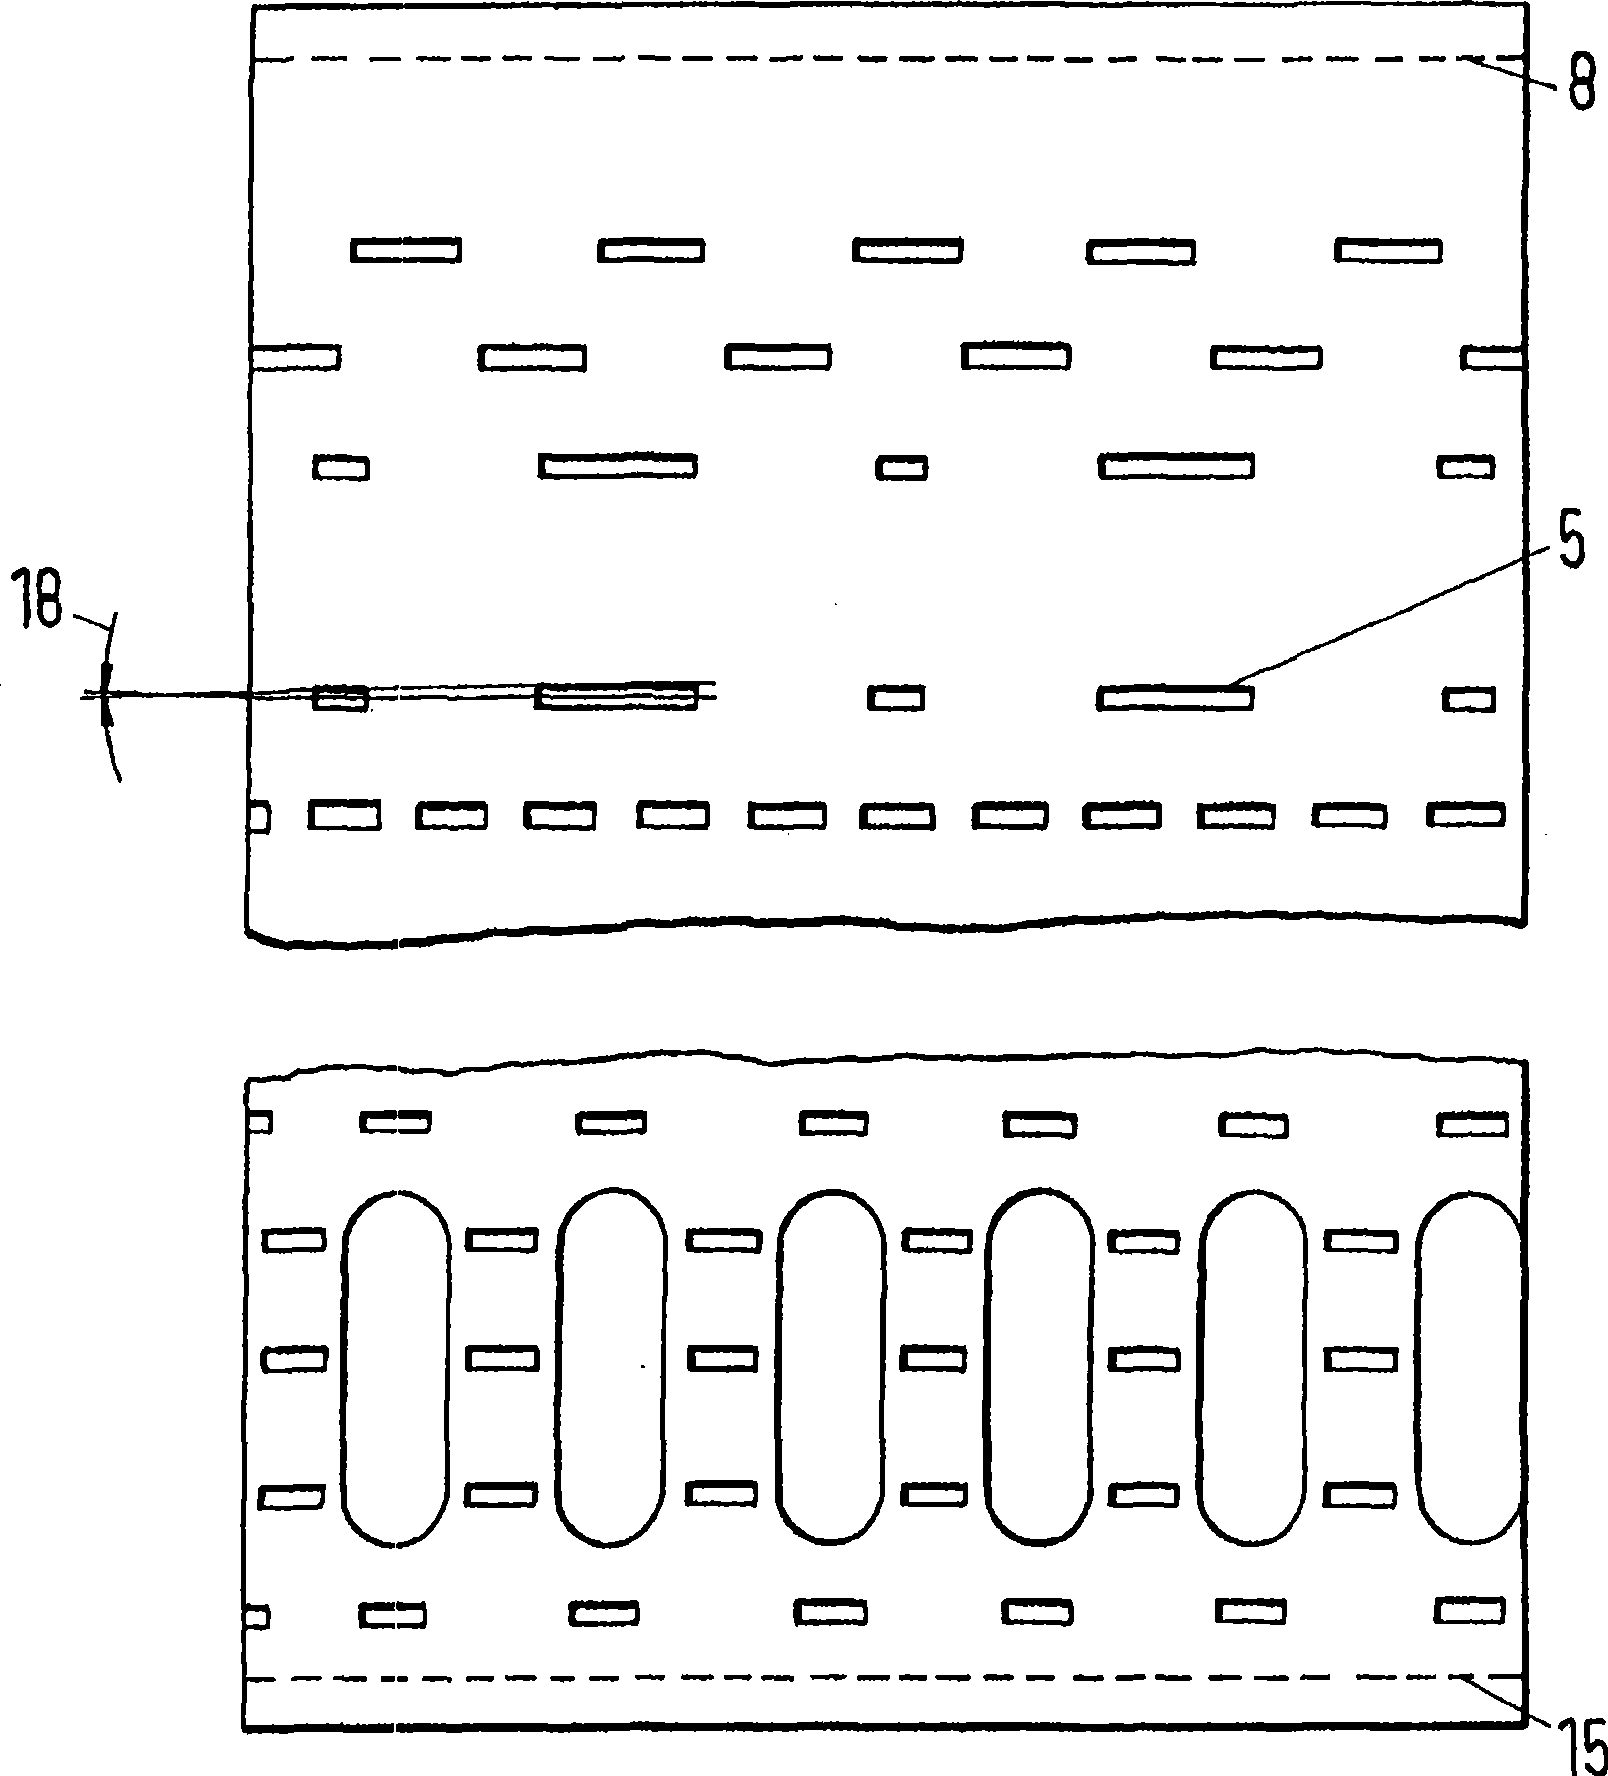 Cylinder with devices for containing lubricants